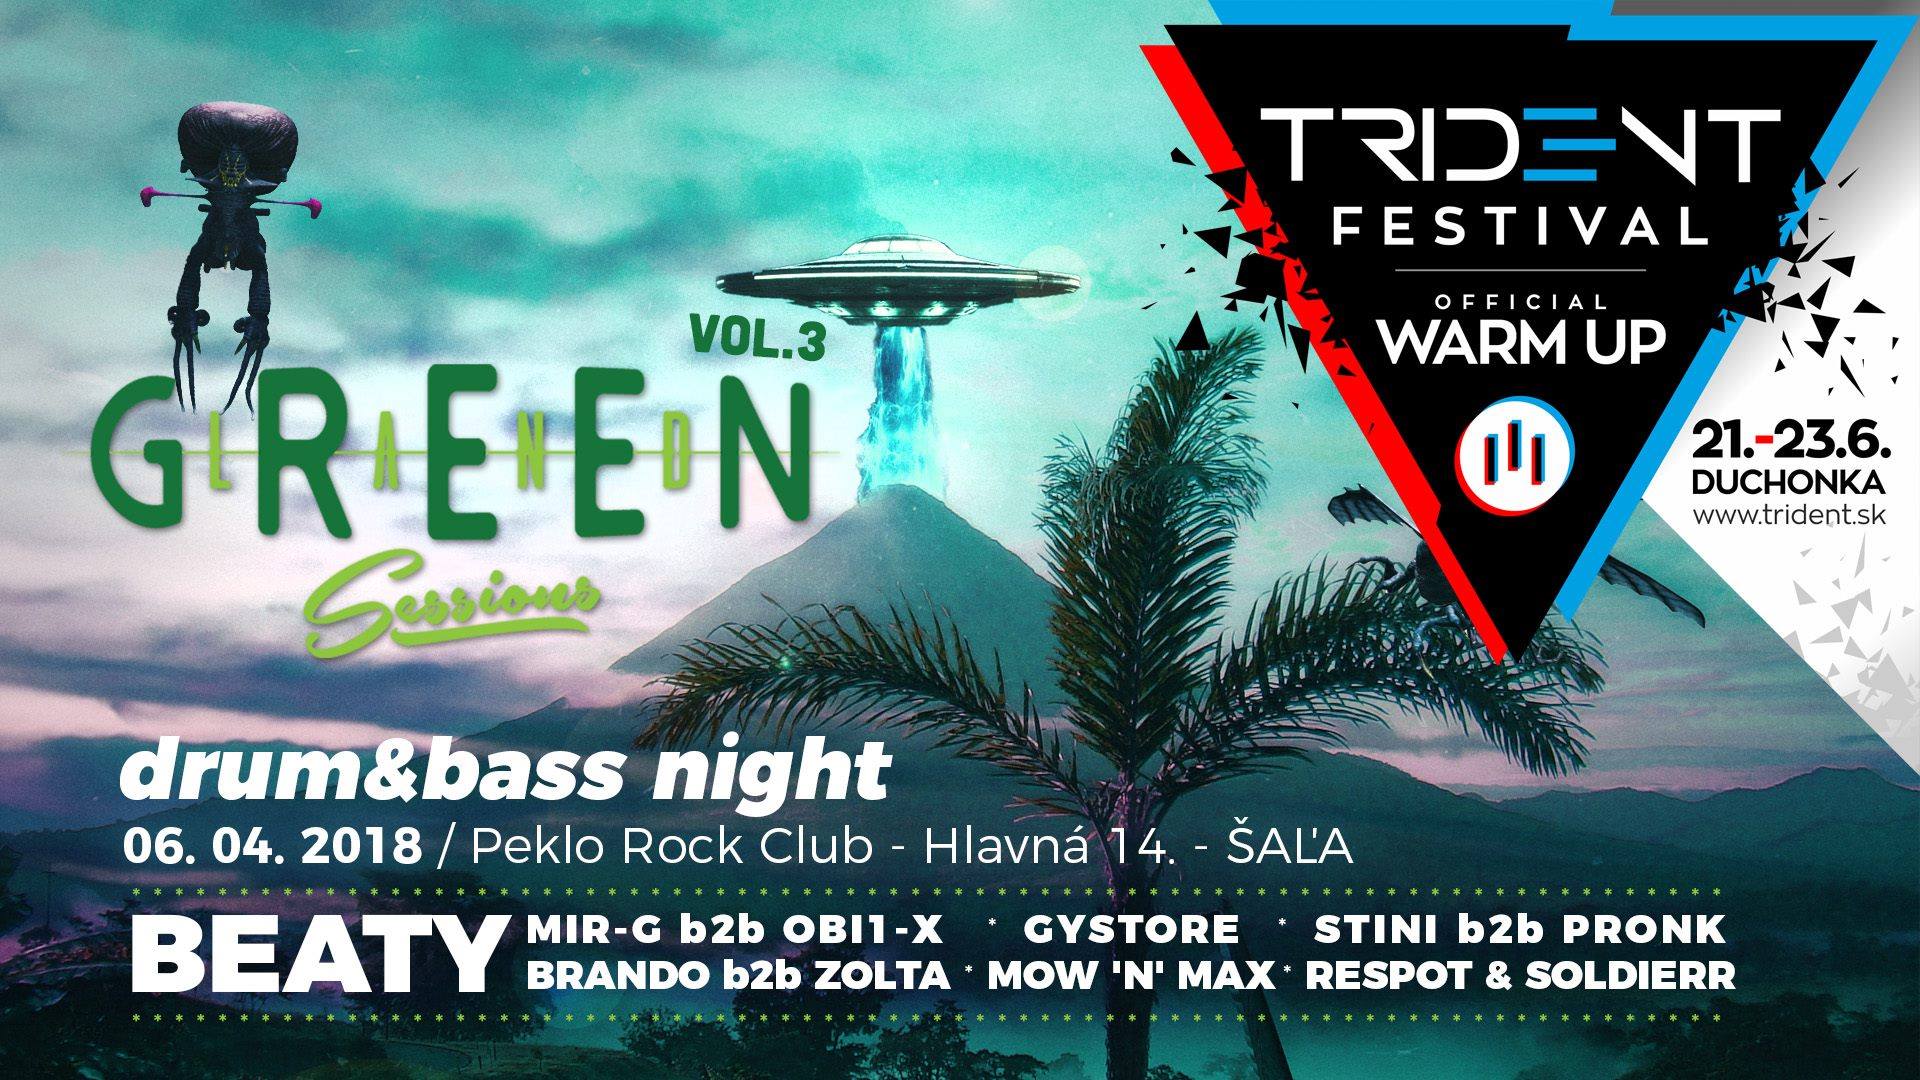 GreenLand Sessions #3 – Official Trident festival warm-up